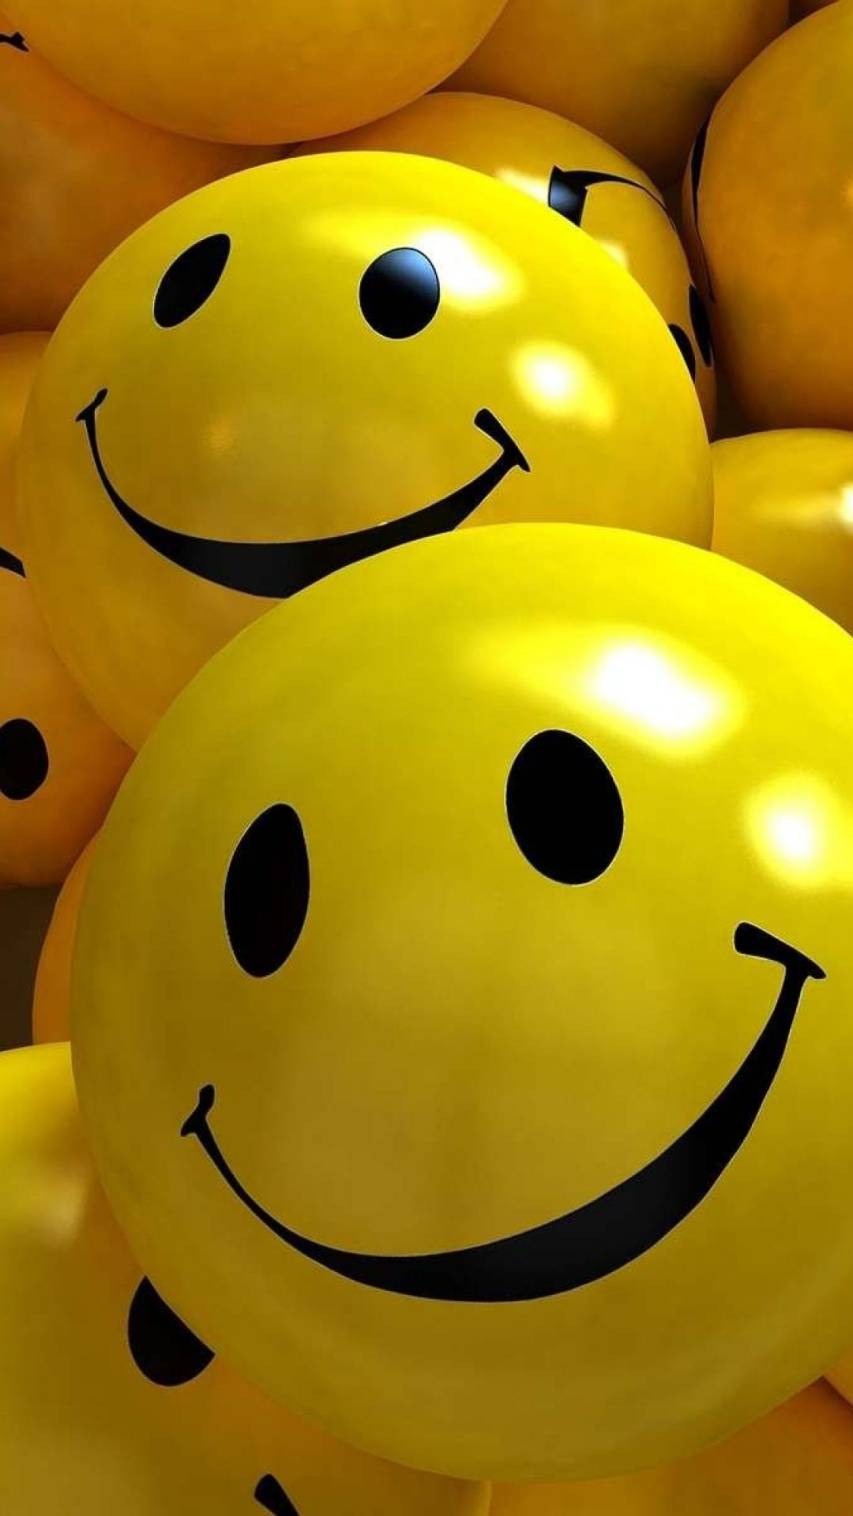 Download Smiley face iPhone Wallpaper